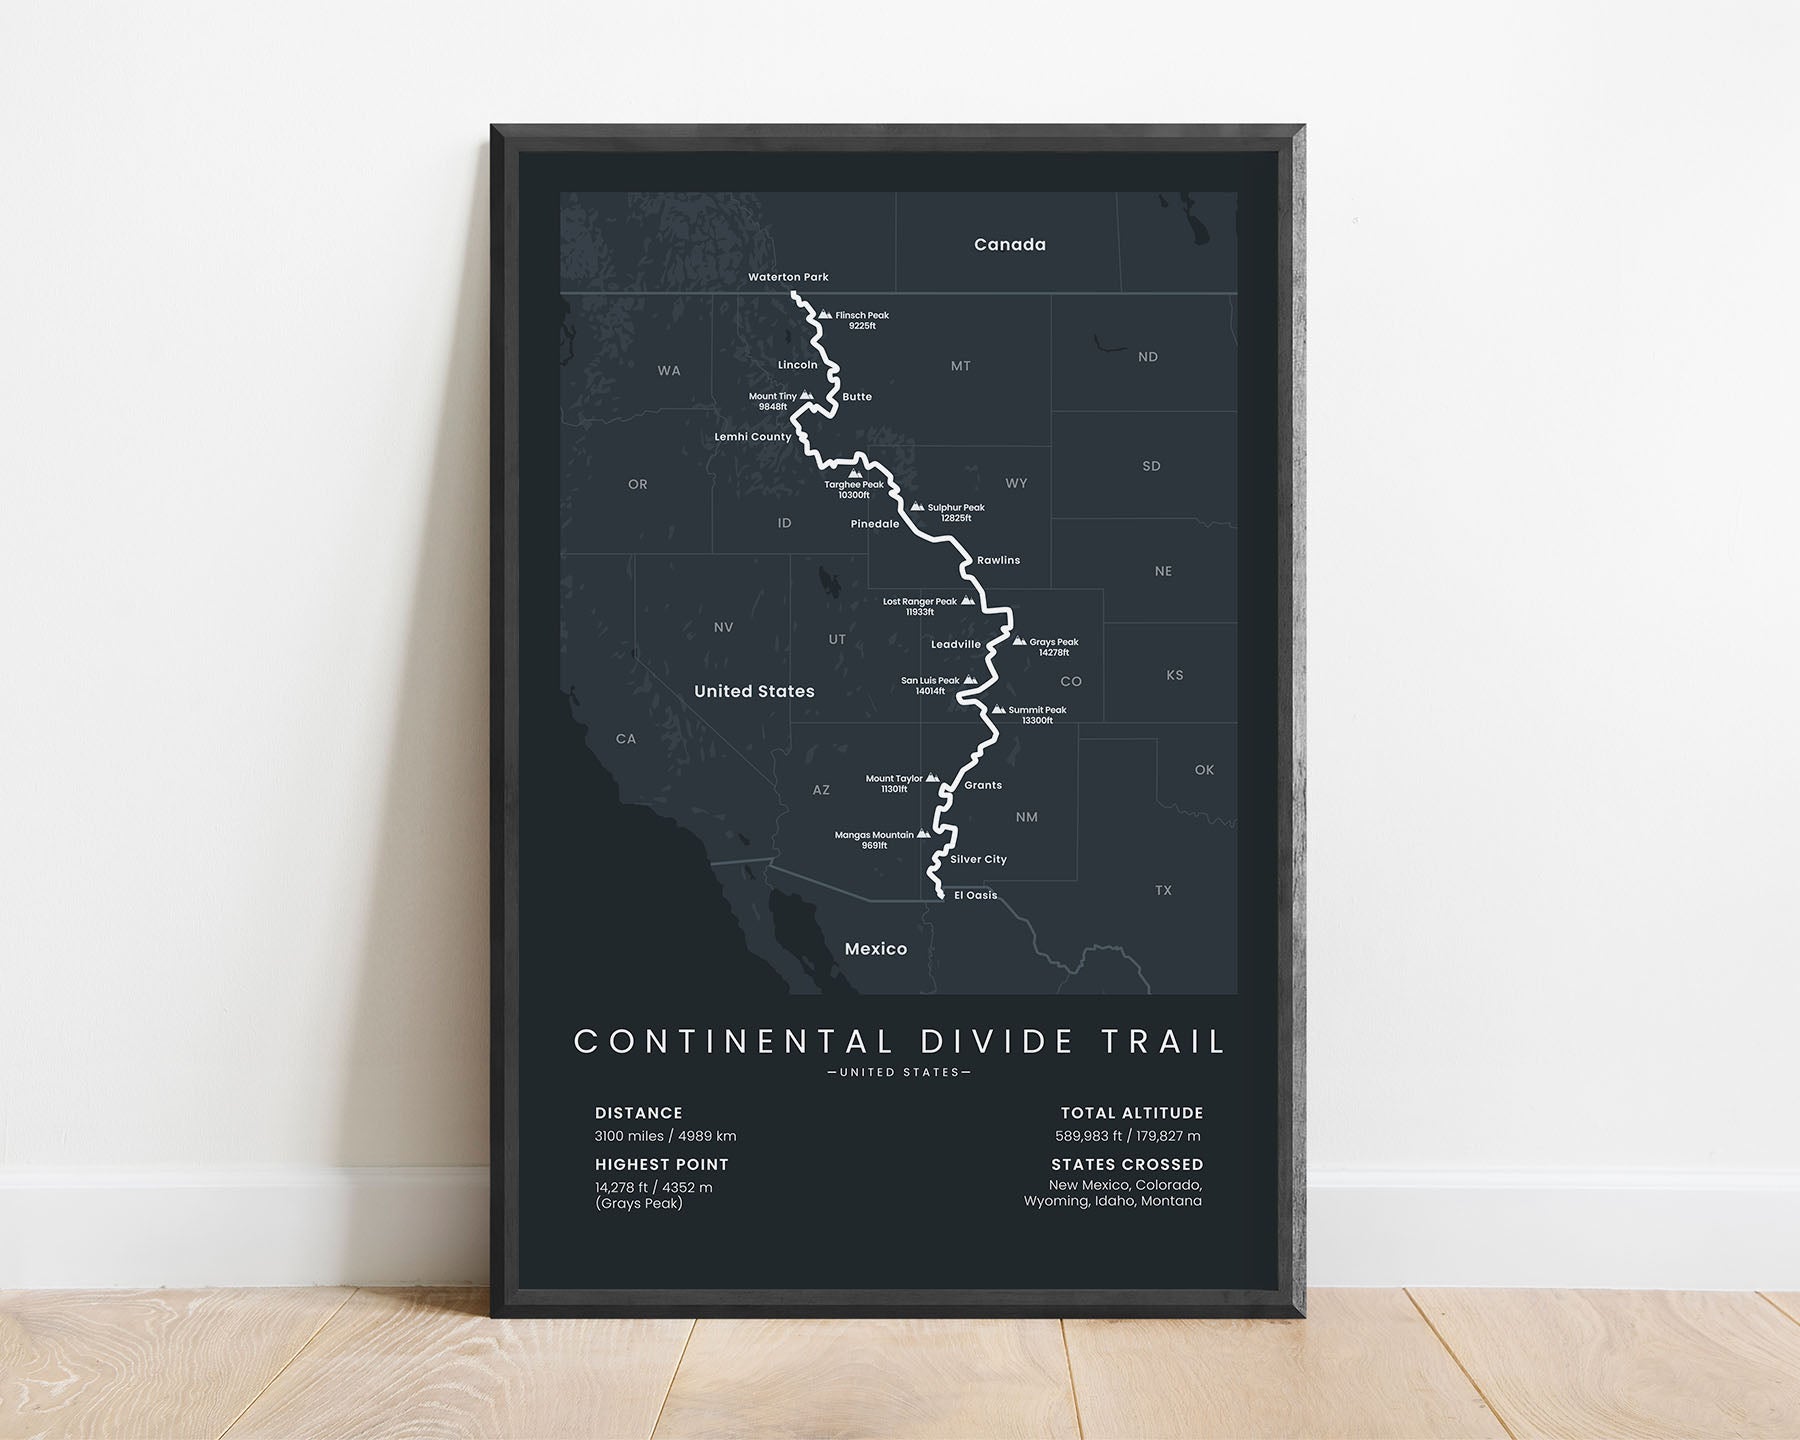 Continental Divide National Scenic Trail (Crossing Montana, Idaho, Wyoming, Colorado, and New Mexico) poster with black background